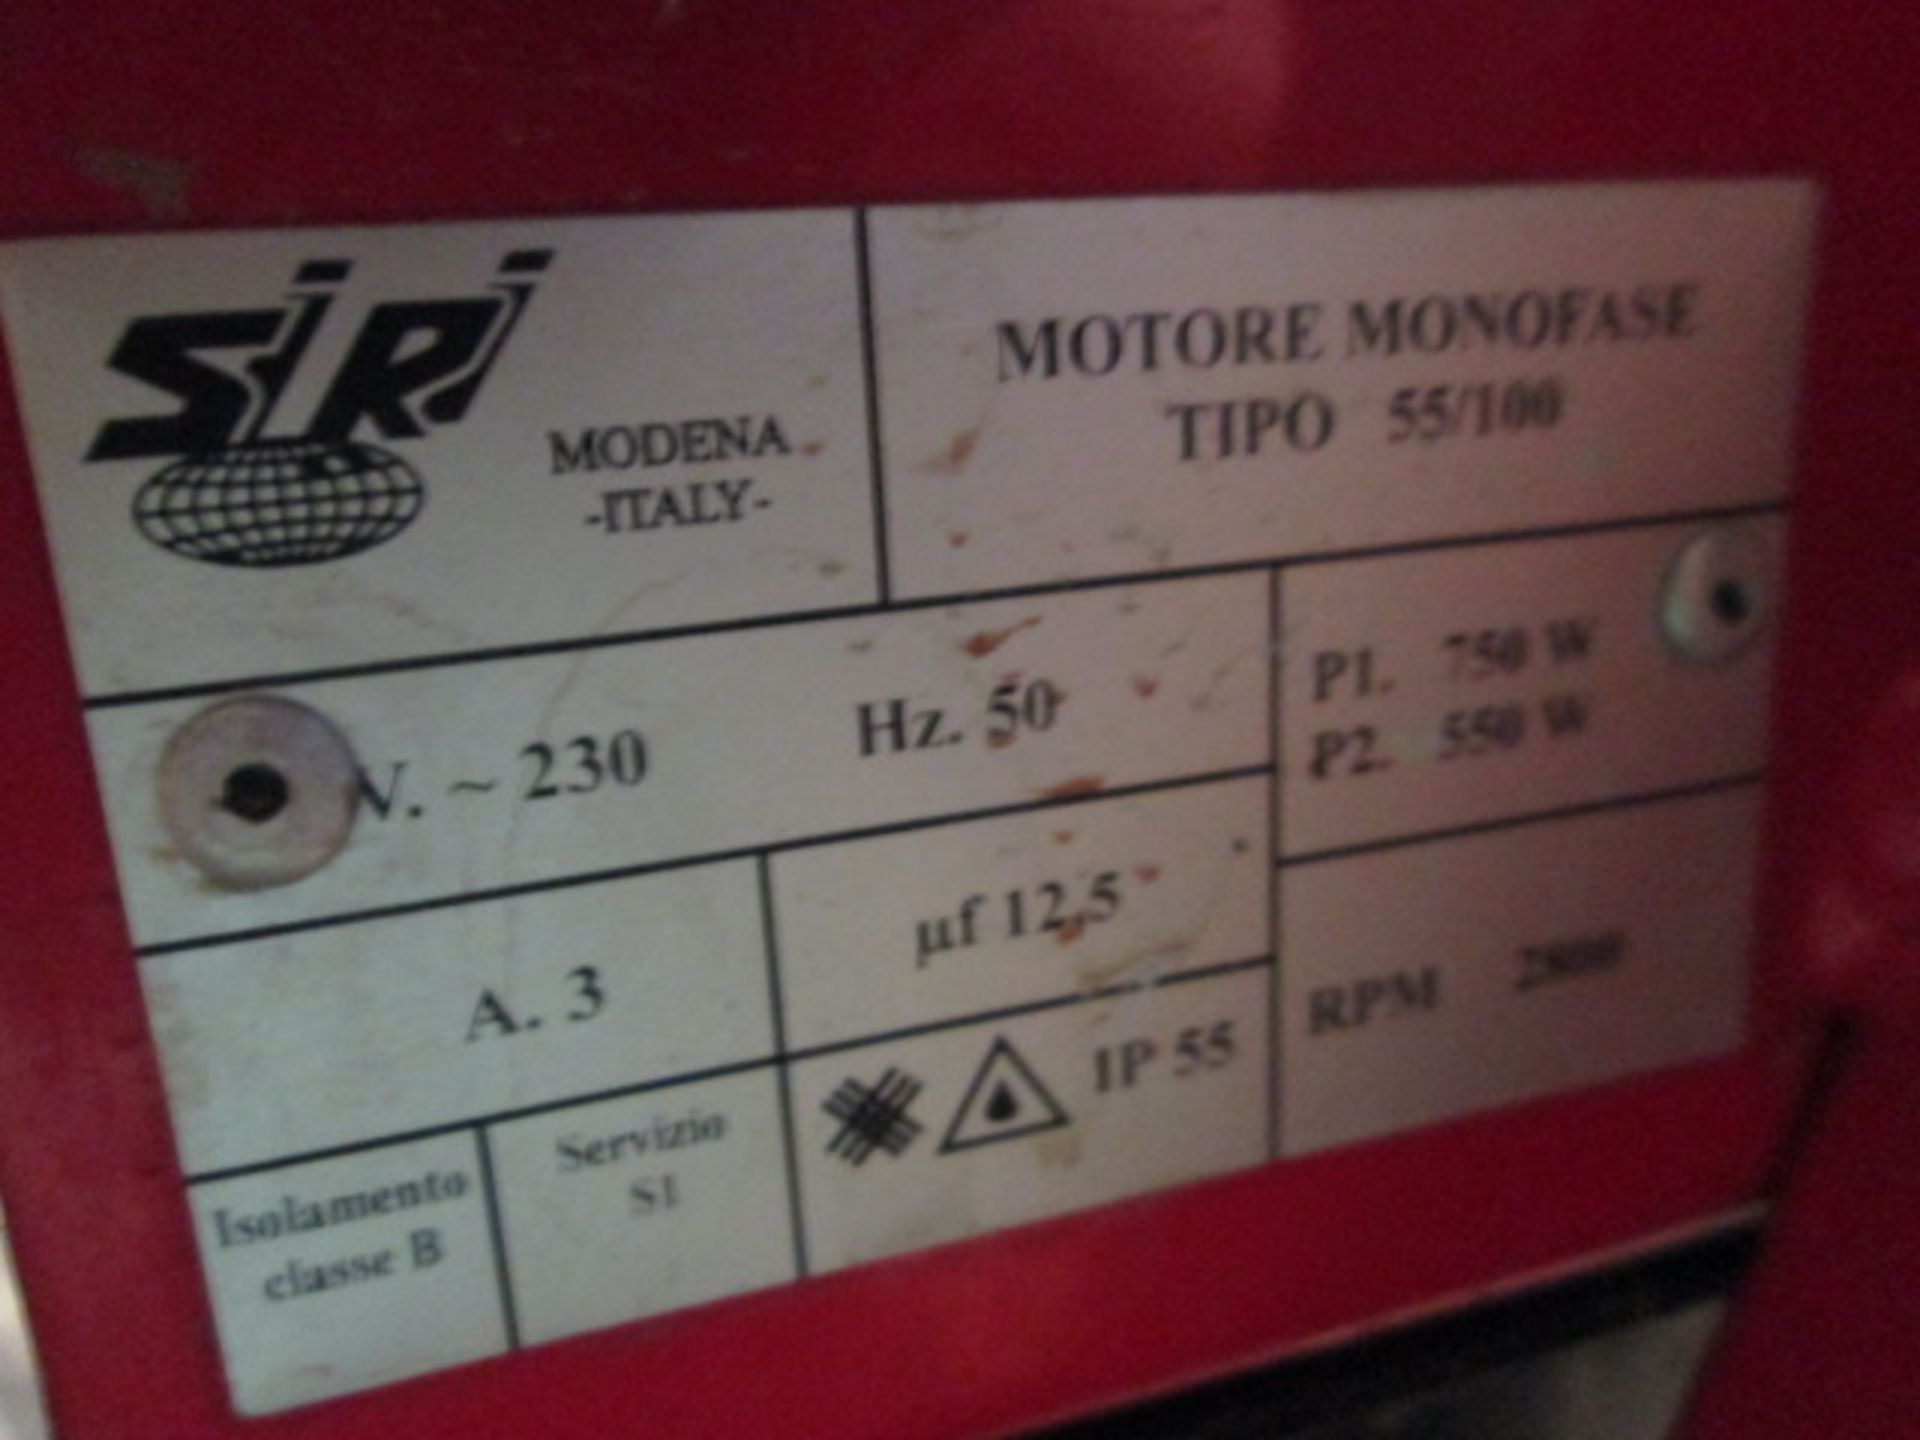 Siri Modena Italy Motore Mono Face Electric Tile Cutter. Type 55/100 - Image 3 of 4